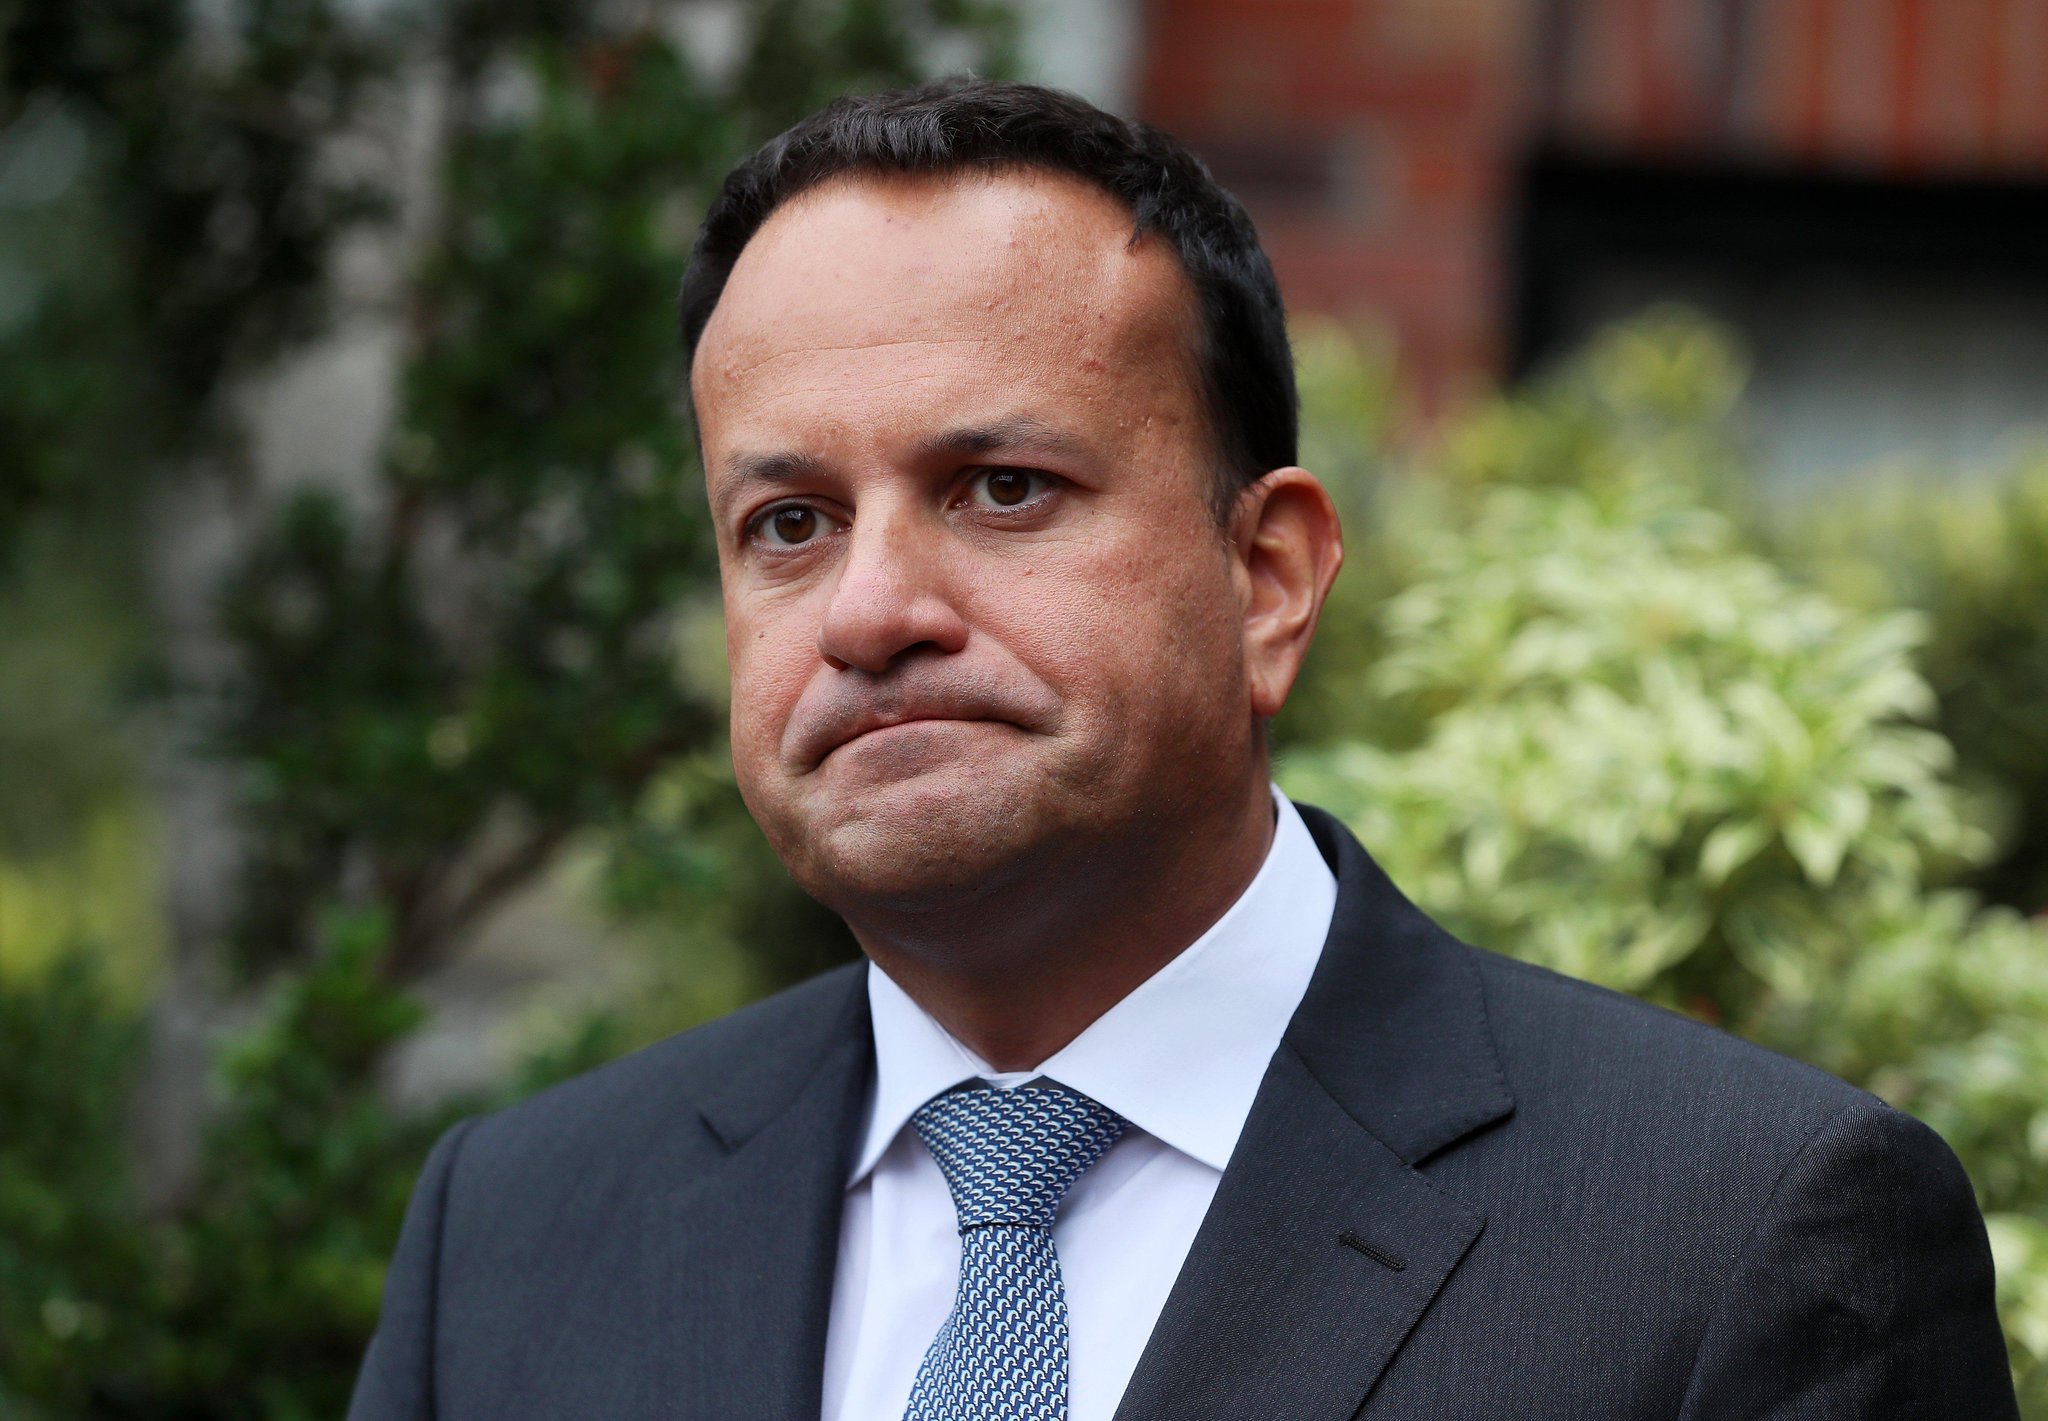 Political relationships ‘not where they should be’, Leo Varadkar tells summit